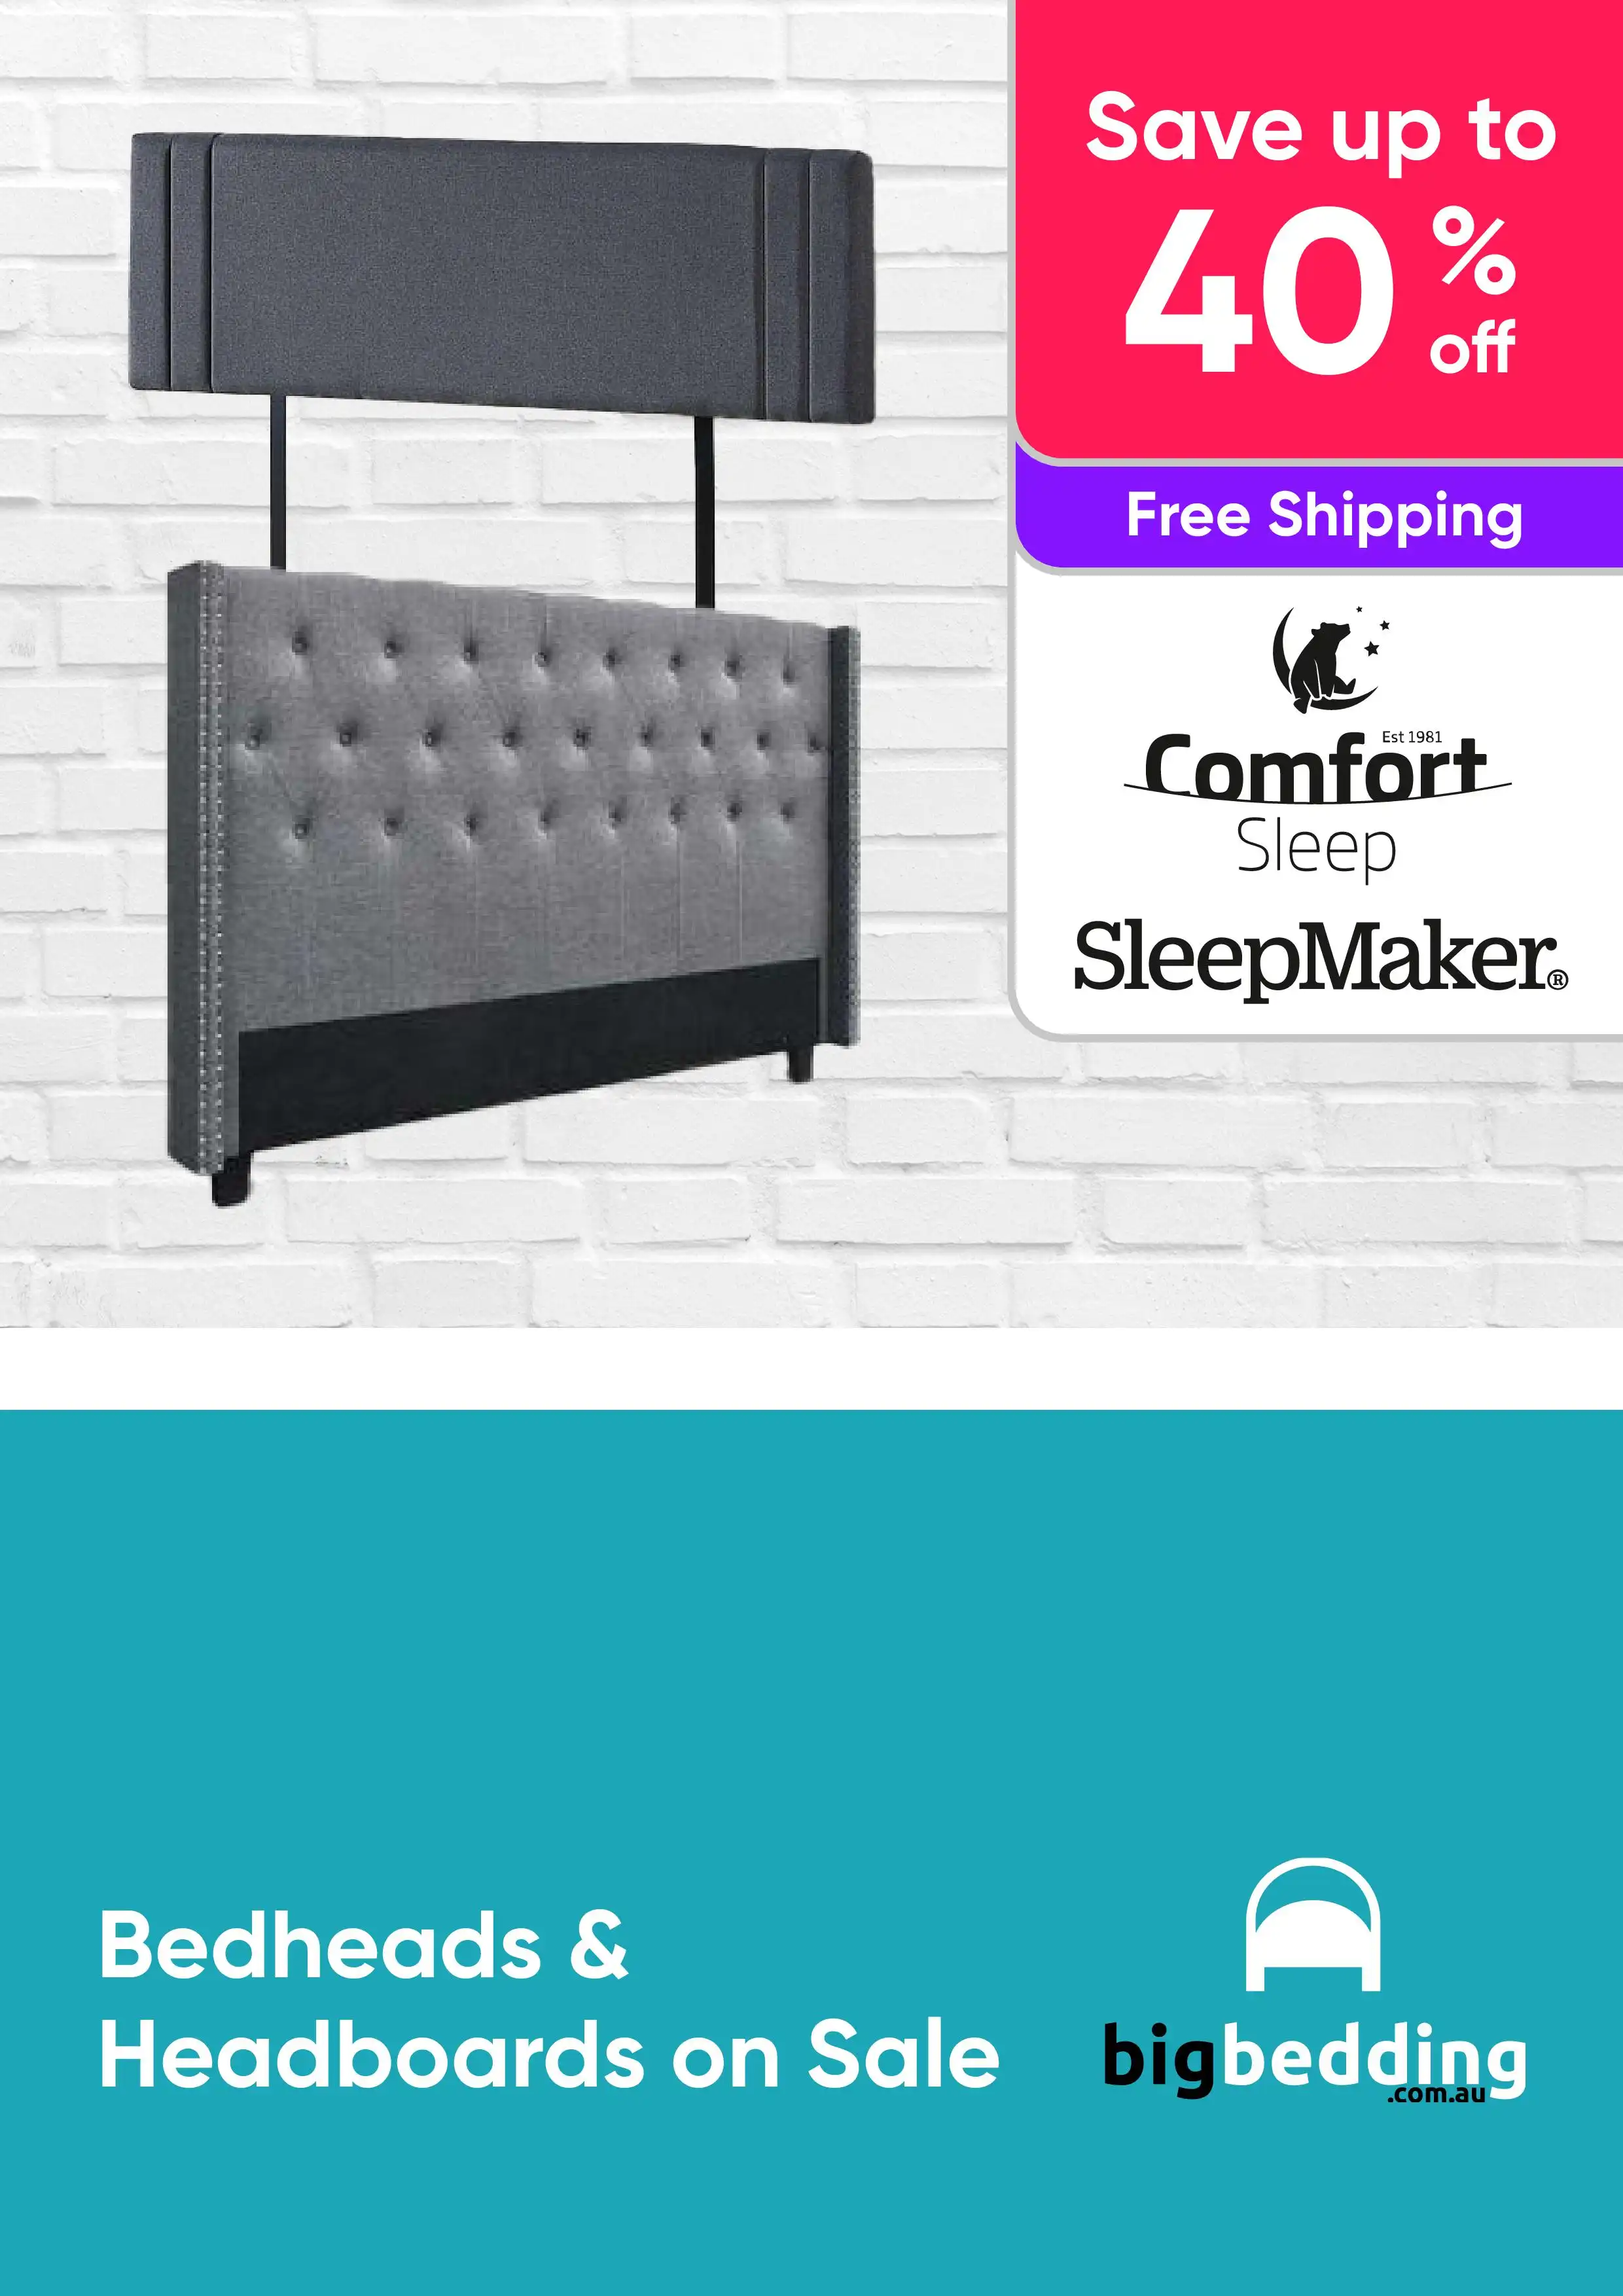 Bedheads on Sale - Shop a Range of Headboards and Bedheads Up to 40% Off